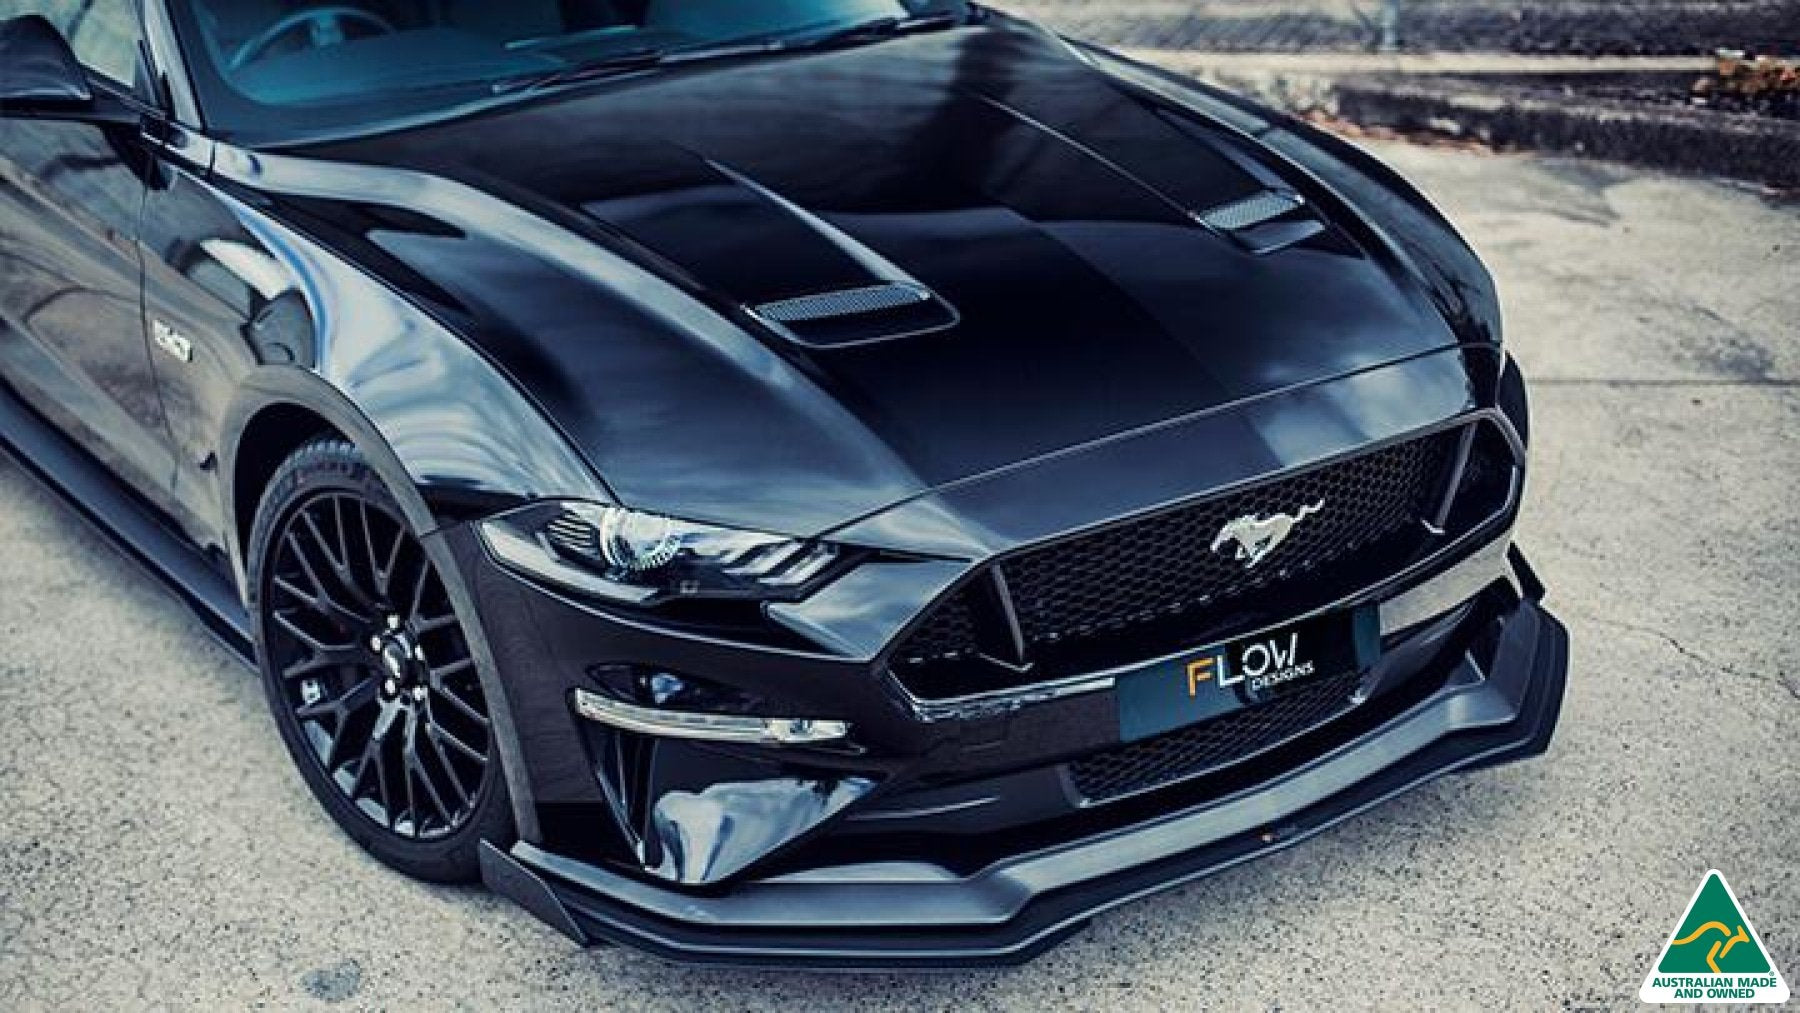 GT Mustang S550 FN Front Splitter Winglets (Pair) - MODE Auto Concepts